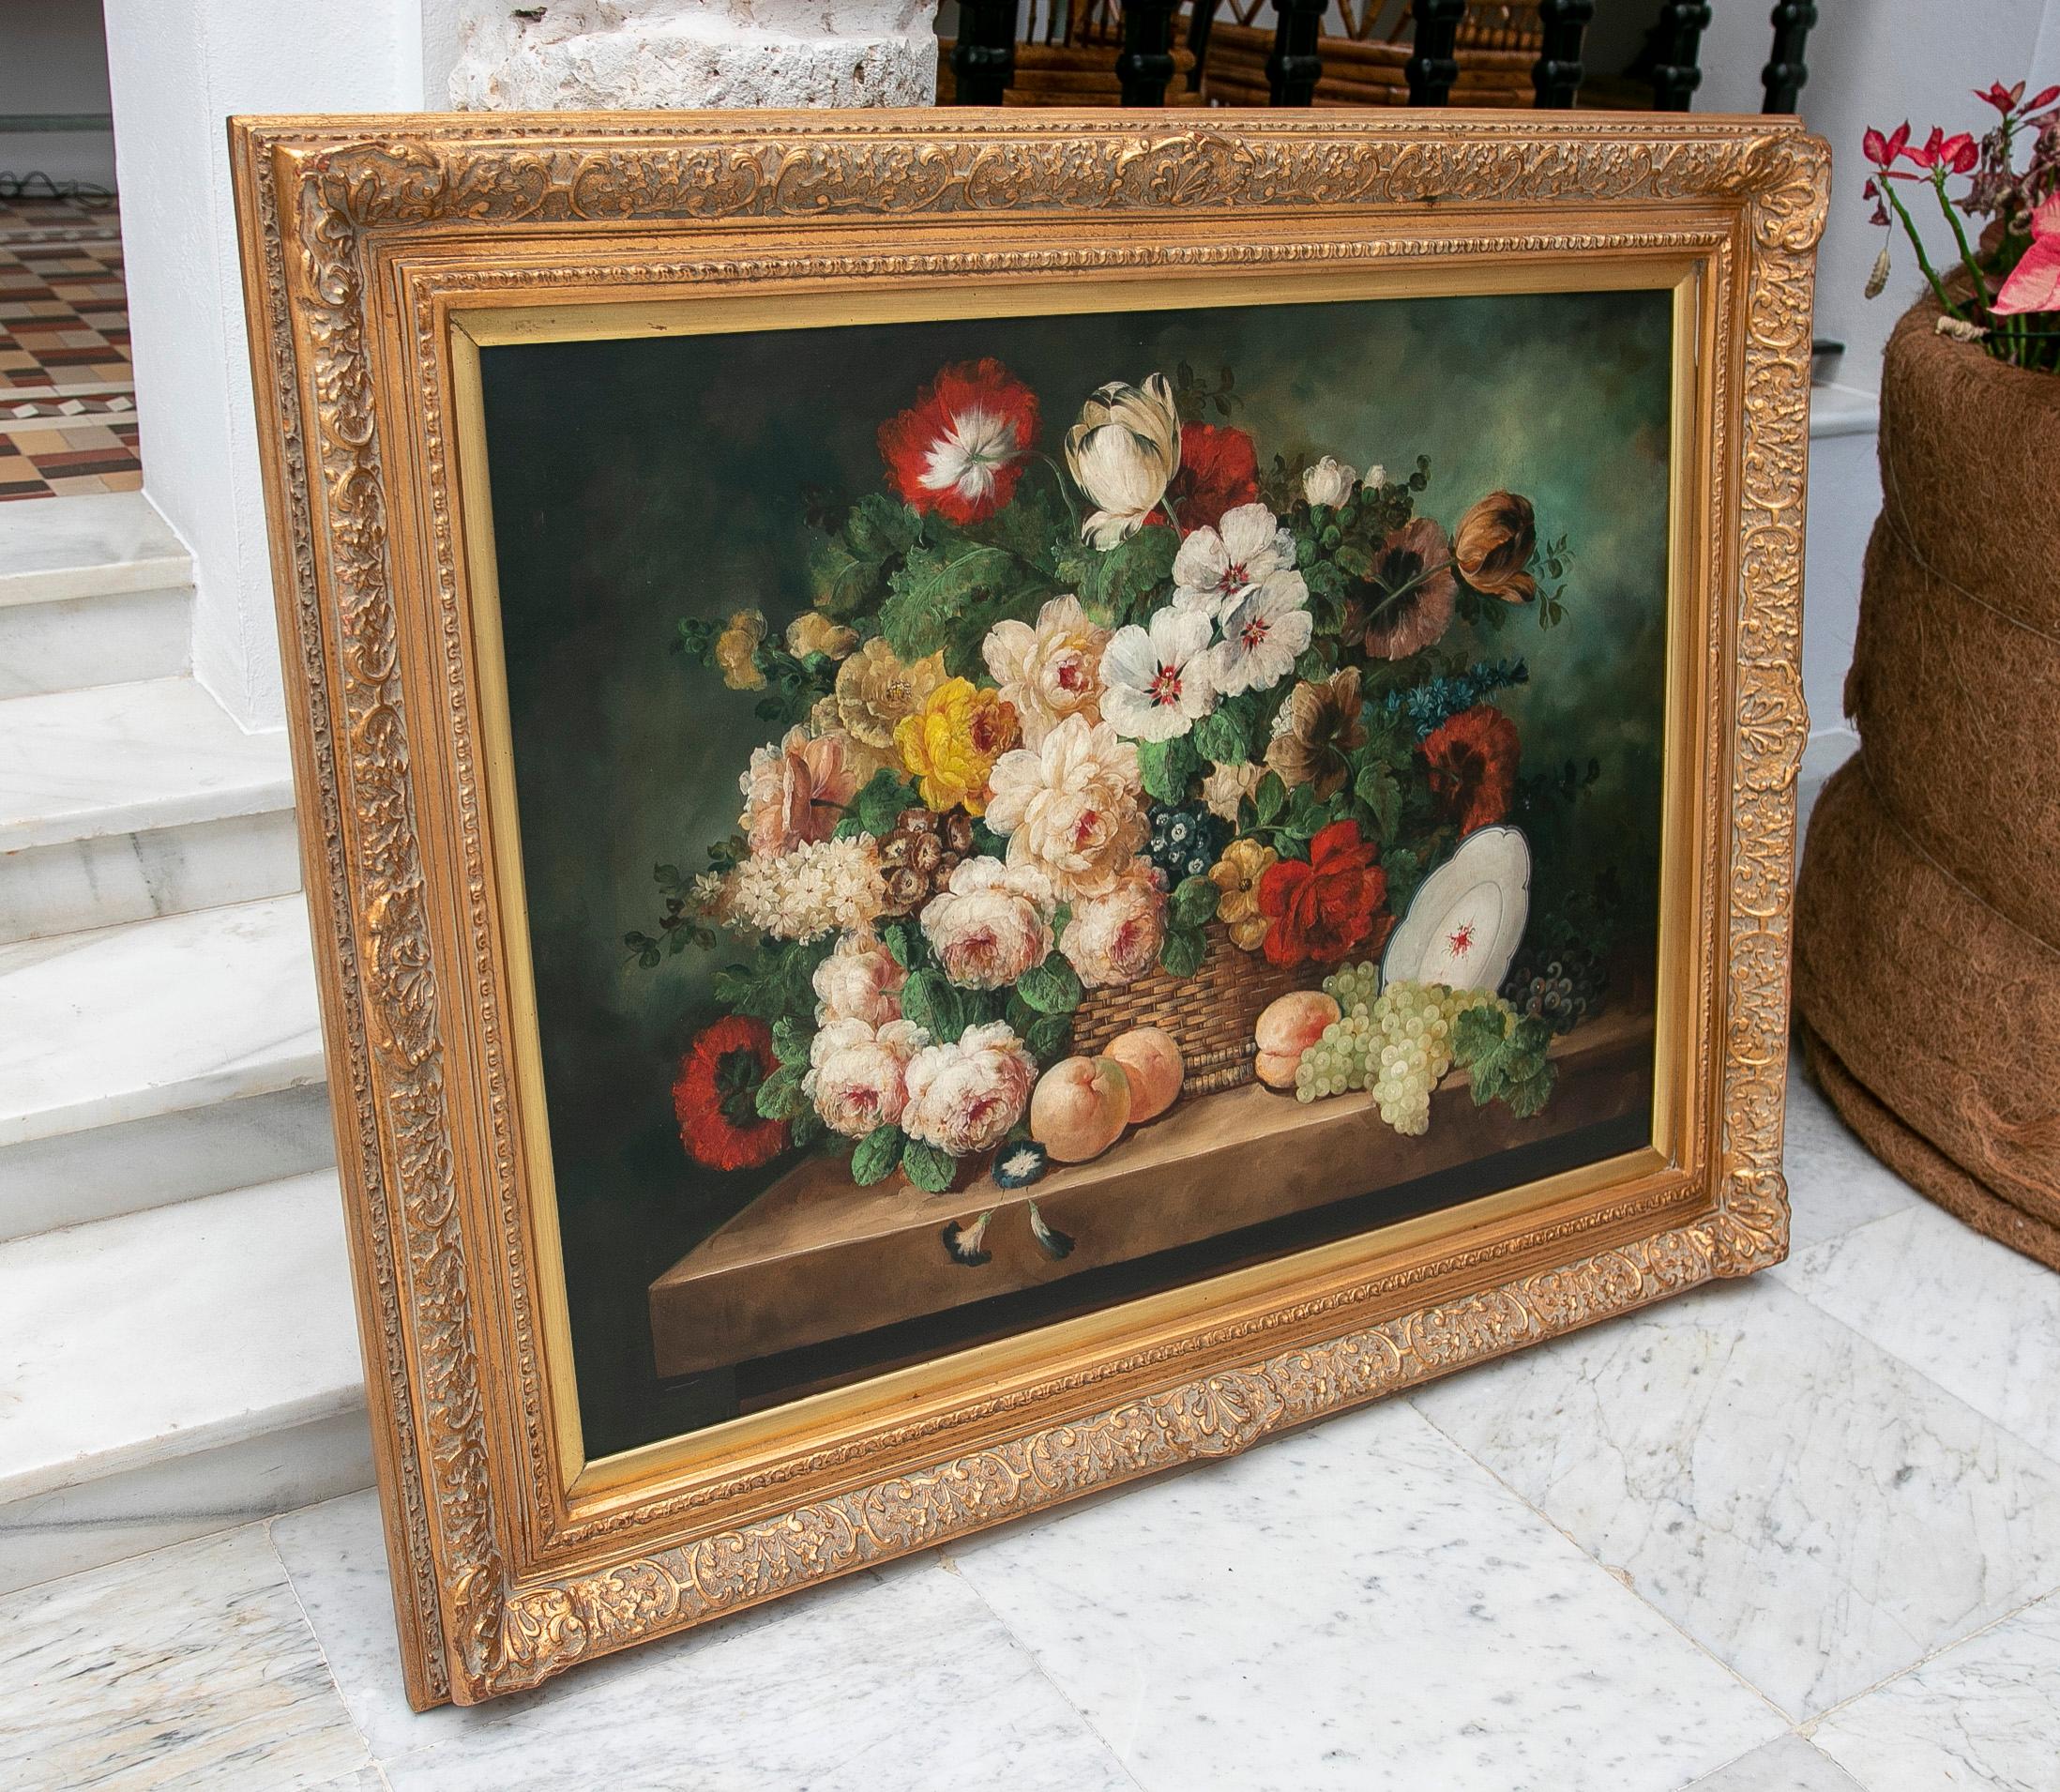 Decorative Hand-Painted Painting of Flowers in Oil on Canvas with Golden Frame
Measurements with frame: 105x128x8cm